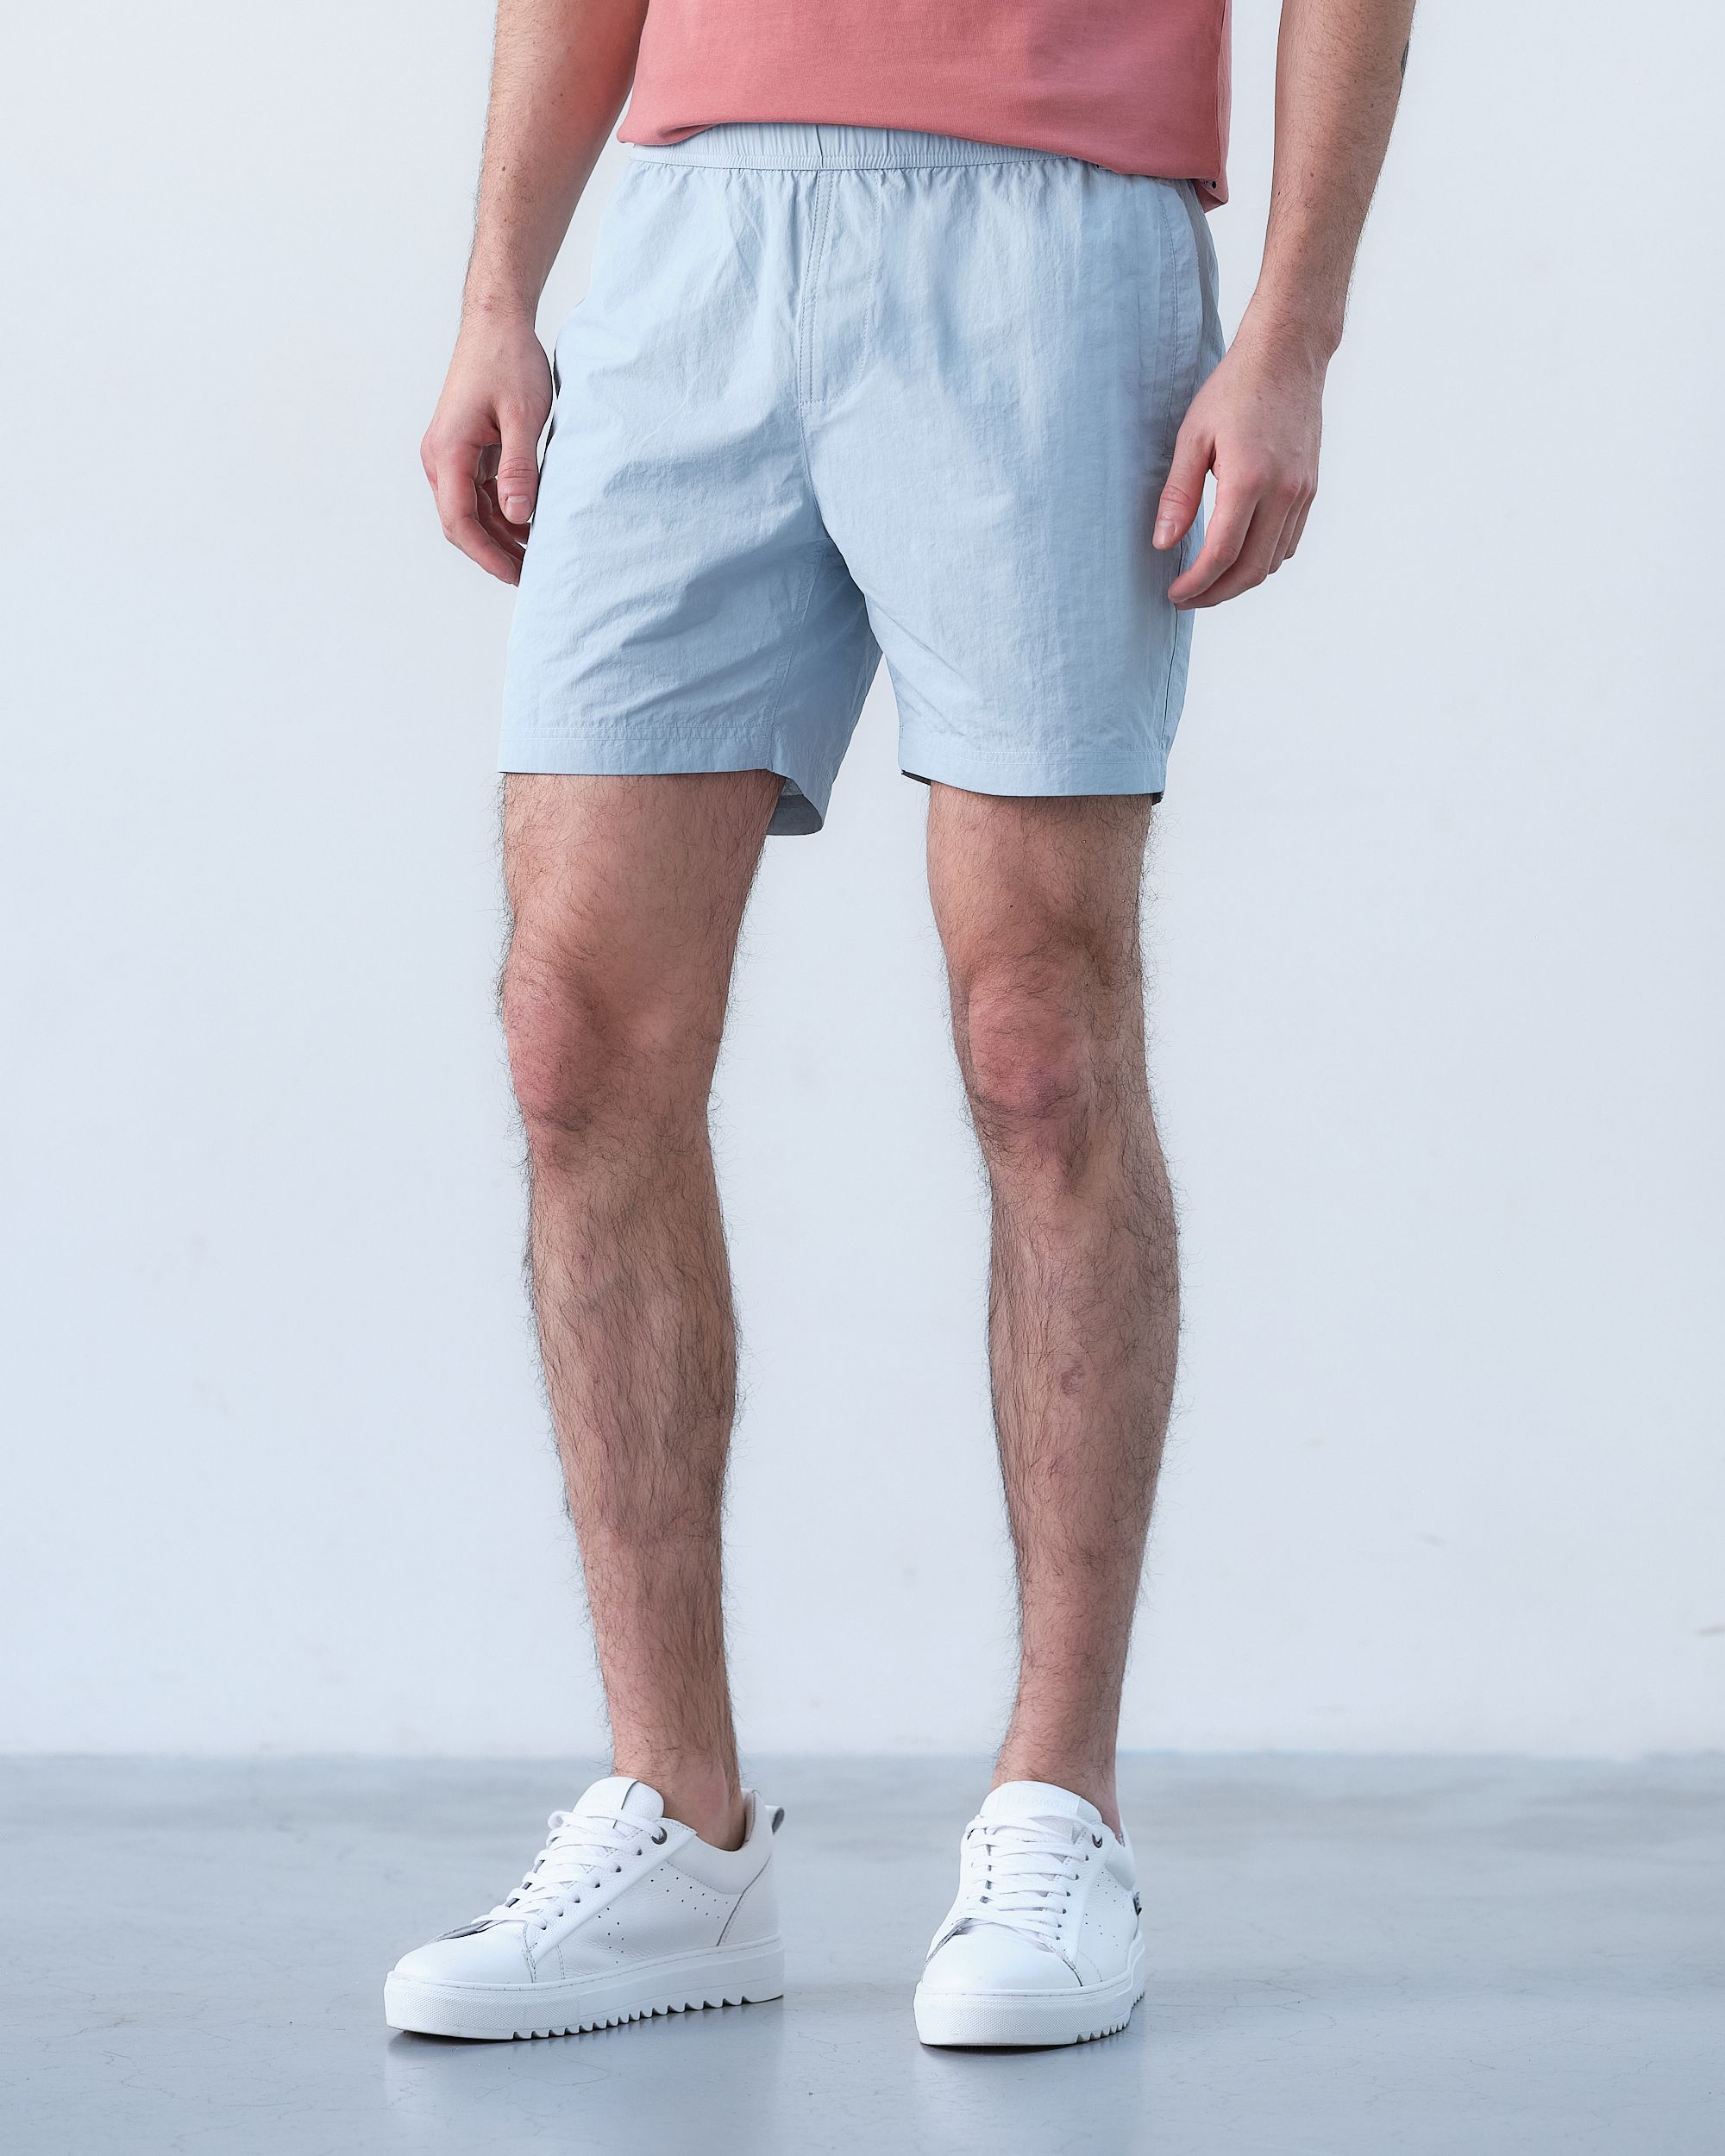 J.C. RAGS Zwemshort Forget-me-not 081579-005-L